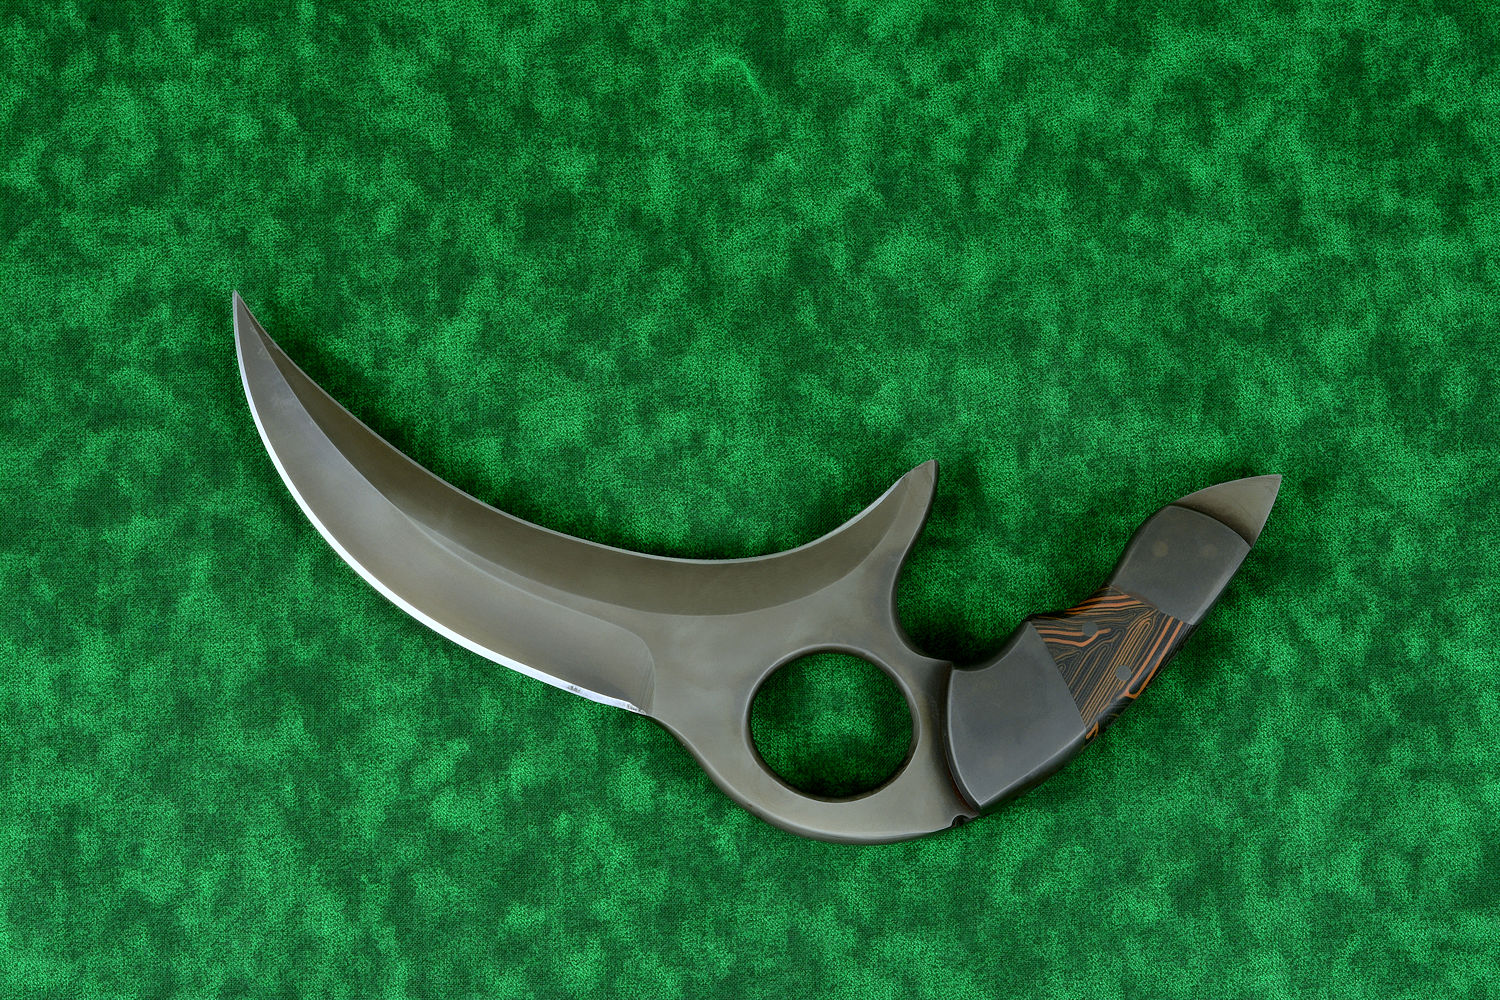 "Drepan" tactical karambit knife, obverse side view in T4 cryogenically treated 440C high chromium martensitic stainless steel blade, 304 stainles steel bolsters, orange/black G10 fiberglass epoxy composite laminate, sheath in leather shoulder, hand-tooled, nylon stitching, stainless steel reinforcement